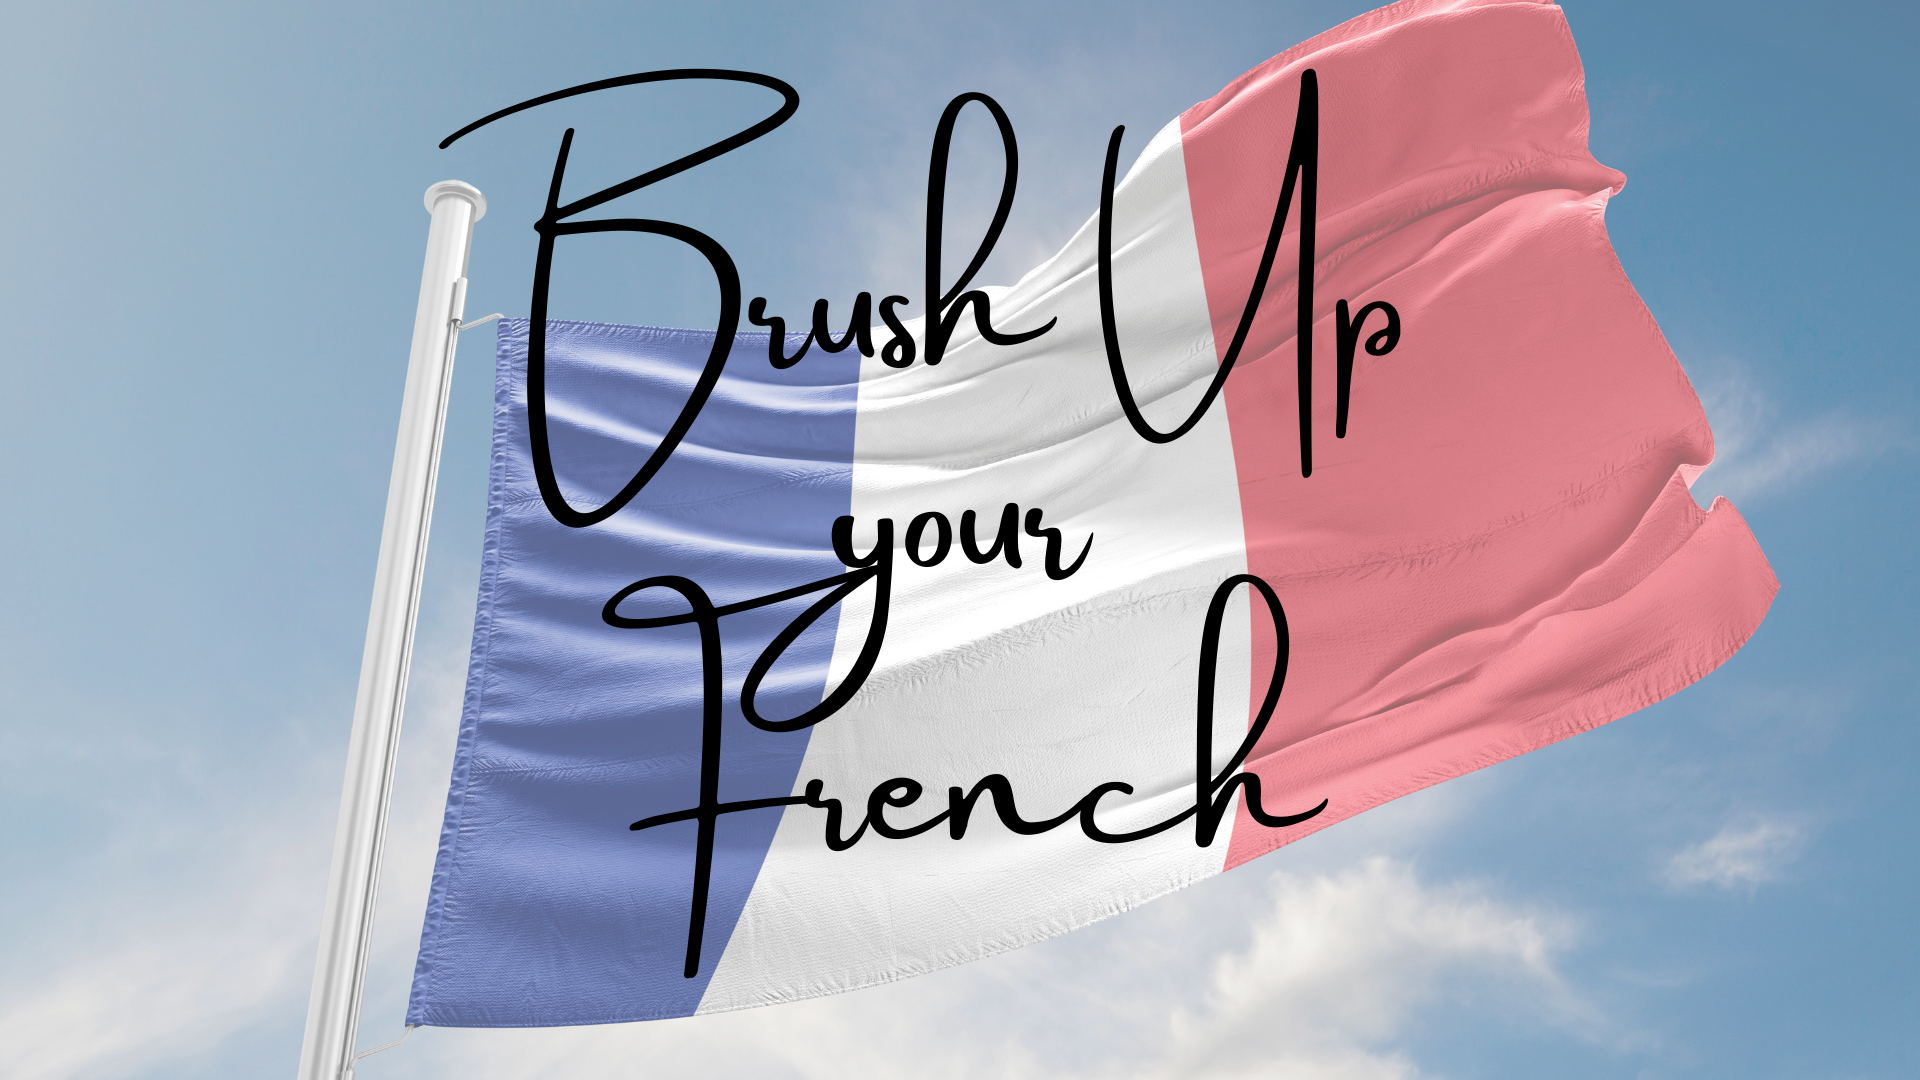 Brush-up your French